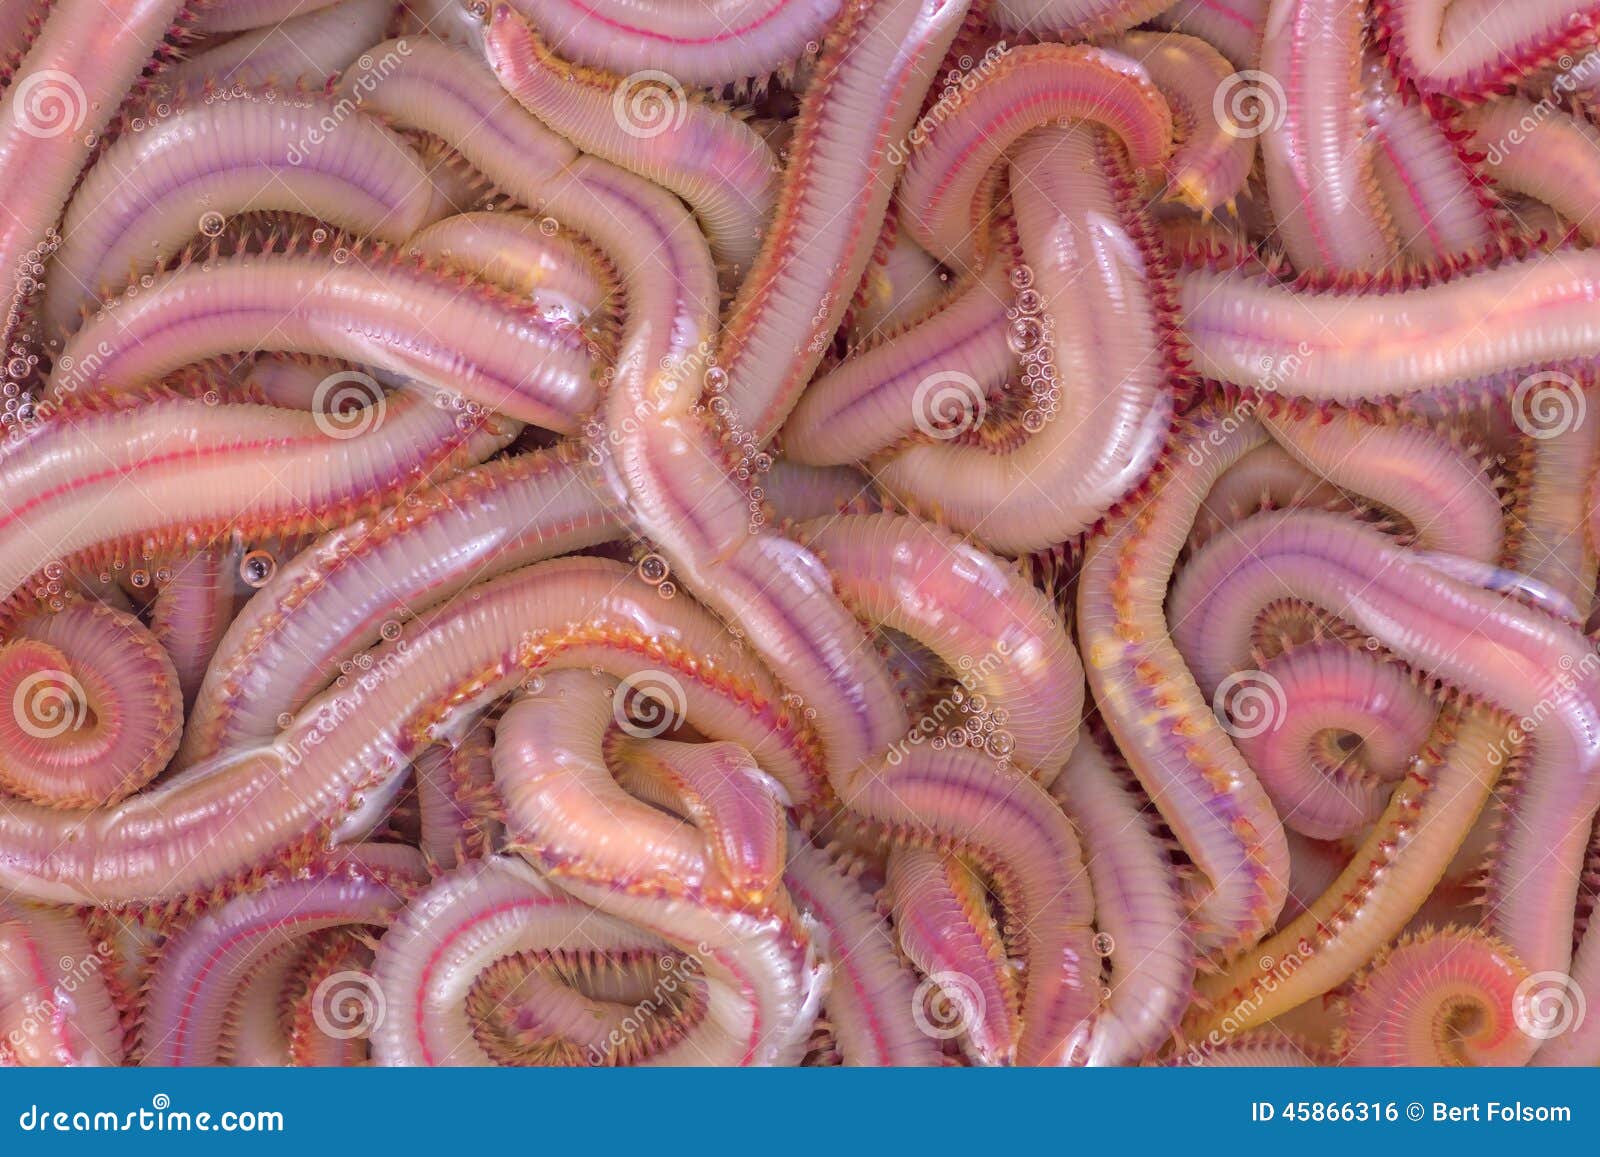 Bloodworms in salt water stock photo. Image of live, external